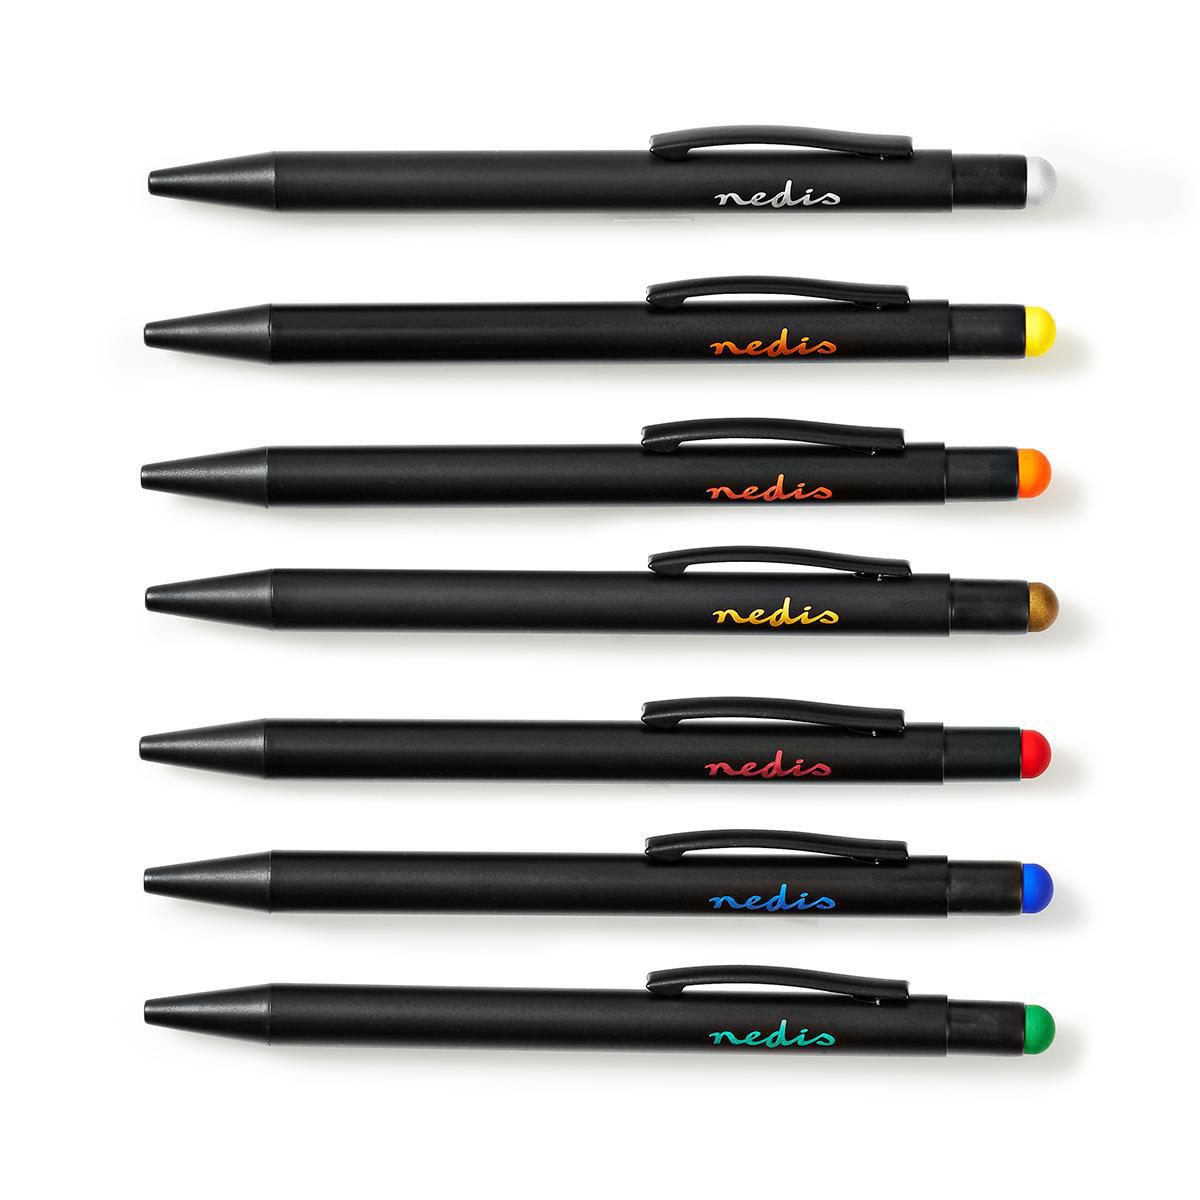 Nedis Stylus for Tablets with Ballpoint 7pcs